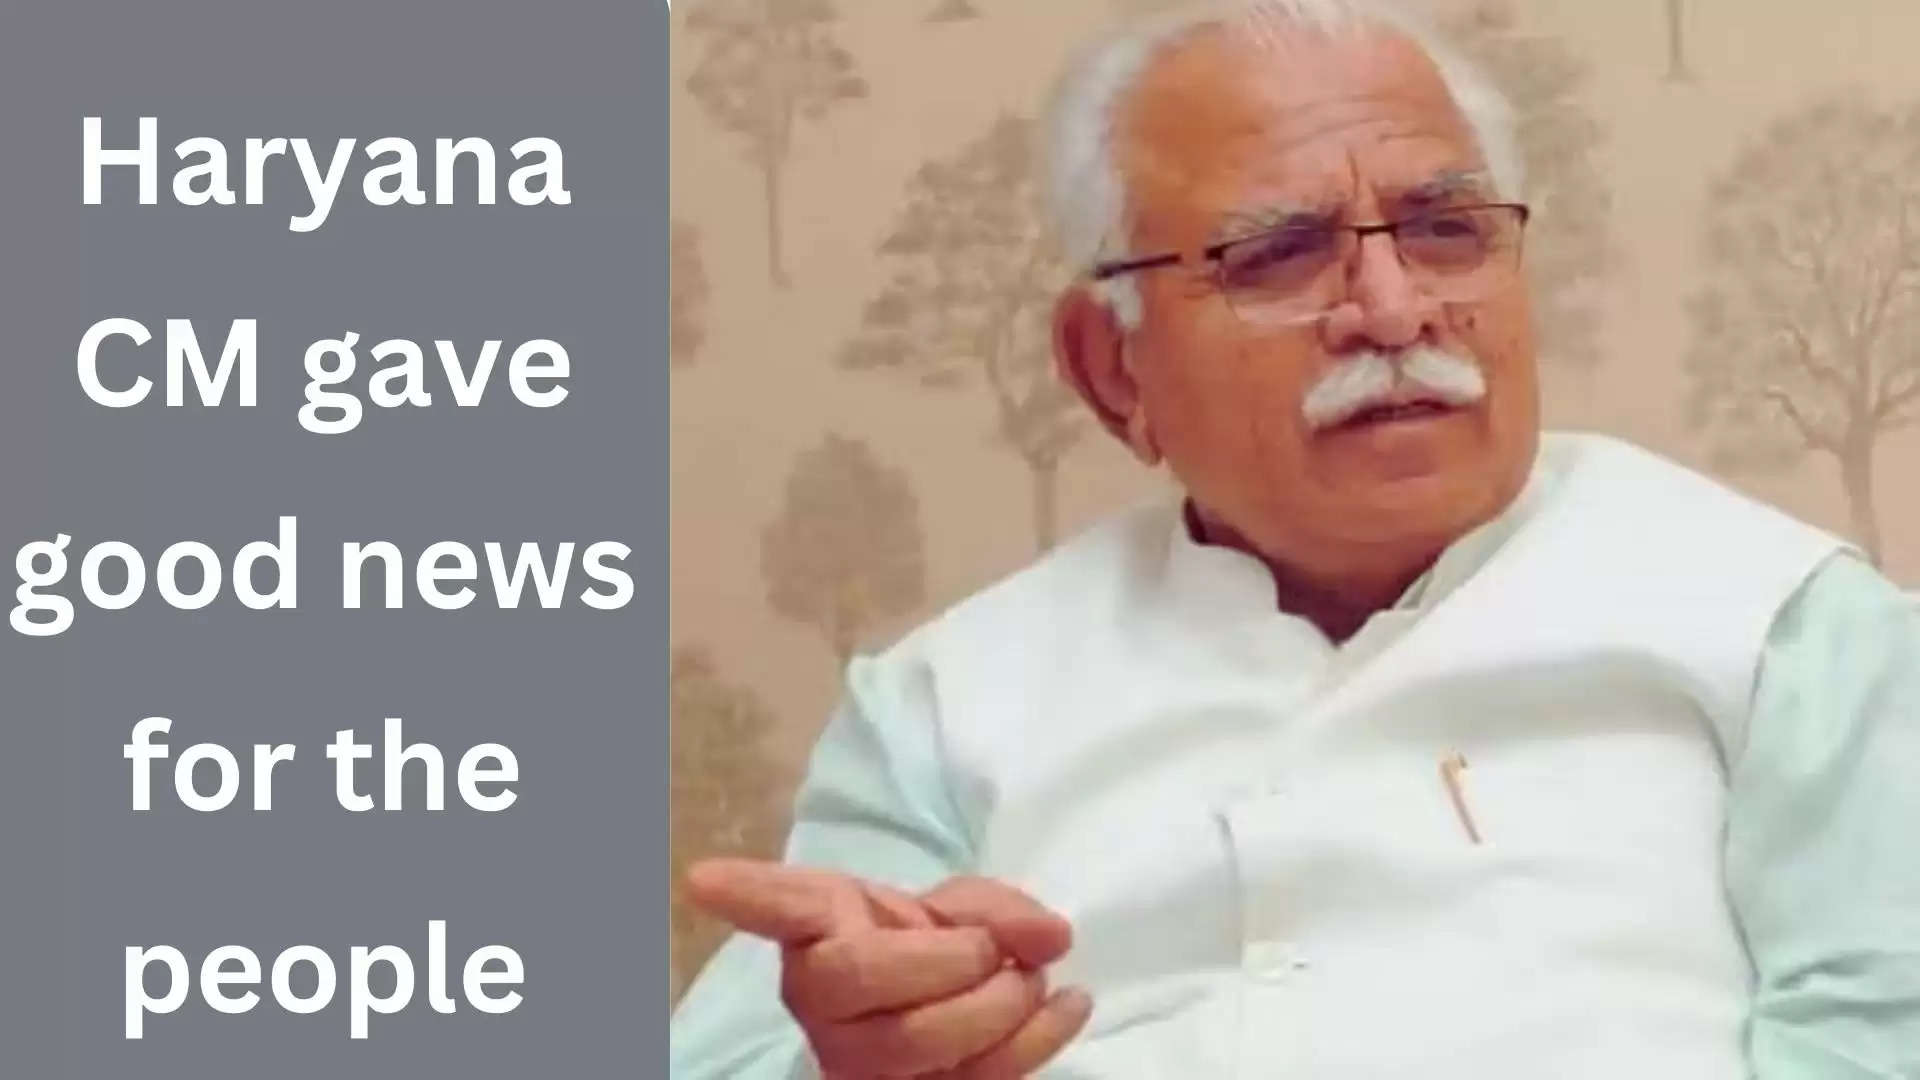 Haryana Chief Minister gave good news for the people